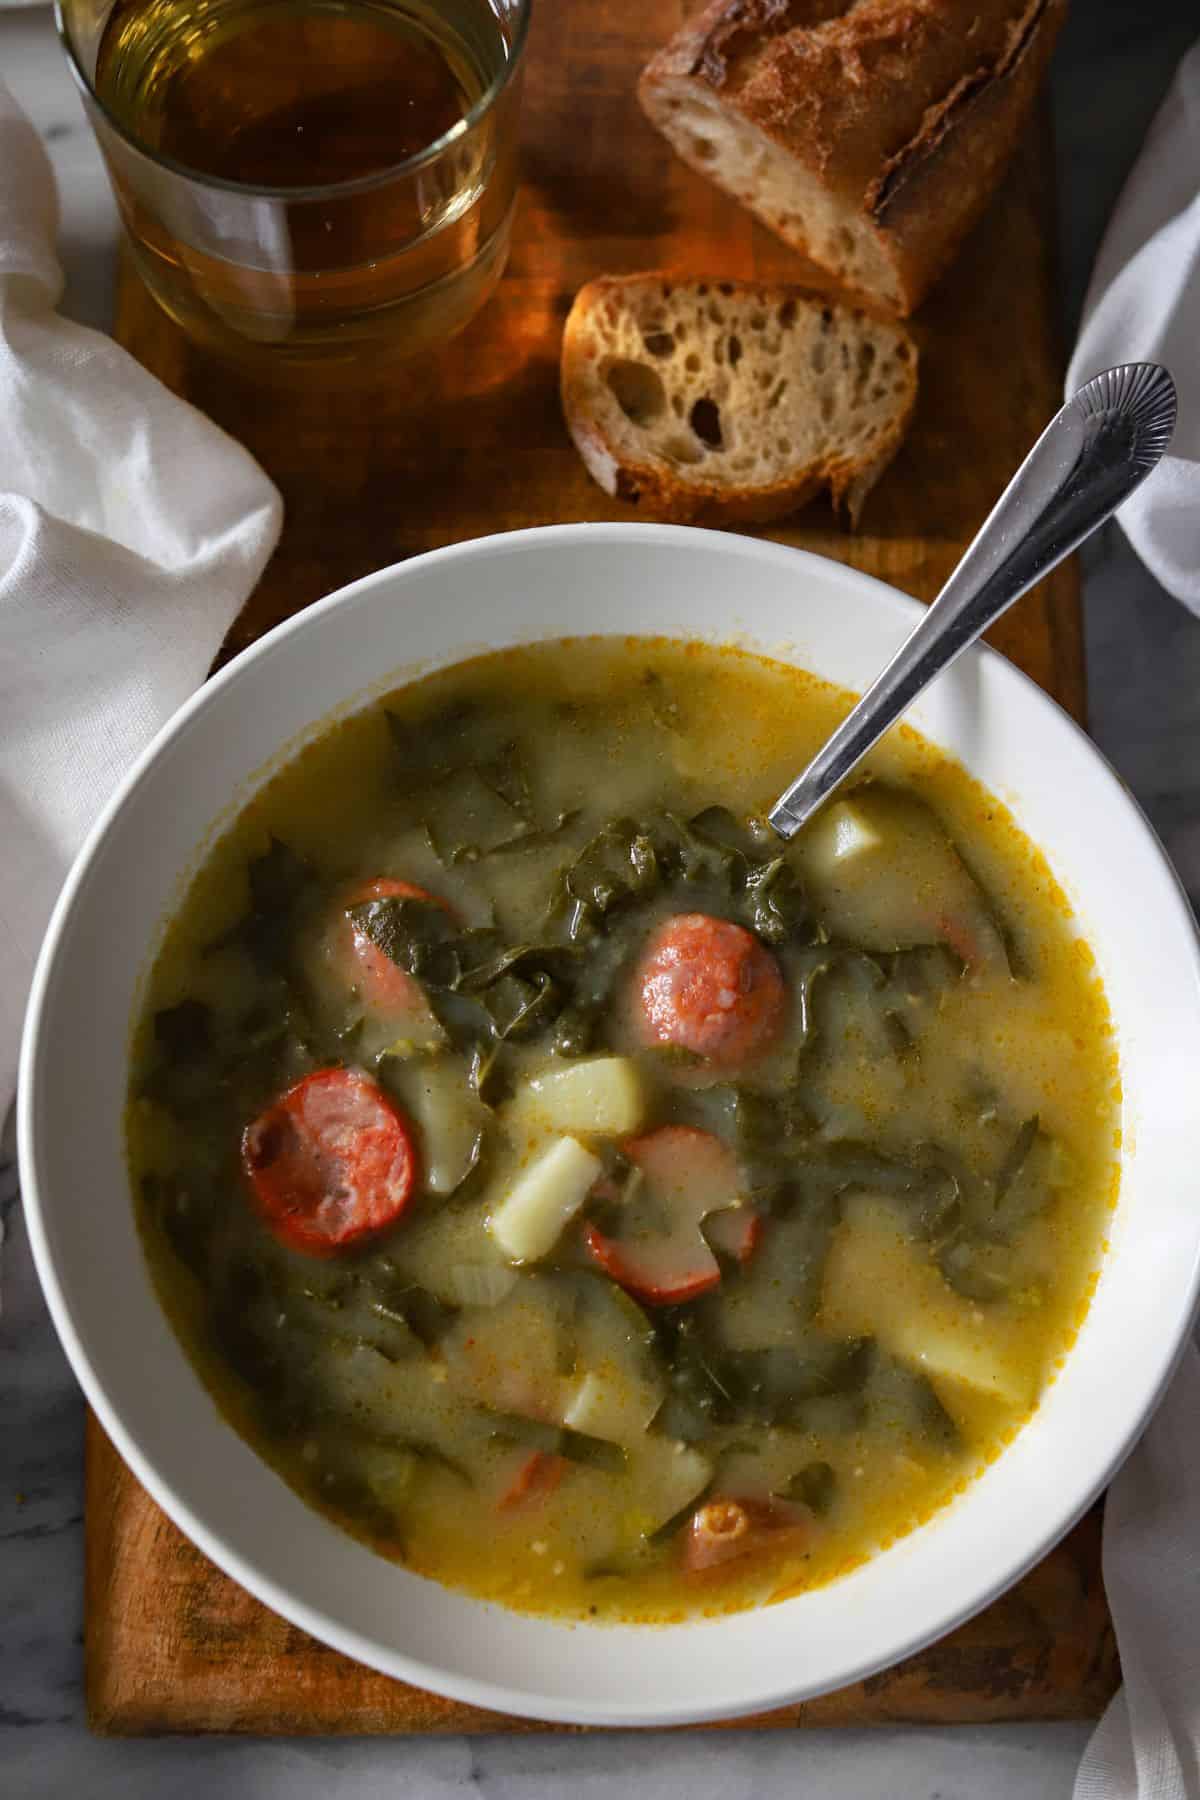 bowl of caldo verde served with a glass of wine and a bread baguette.